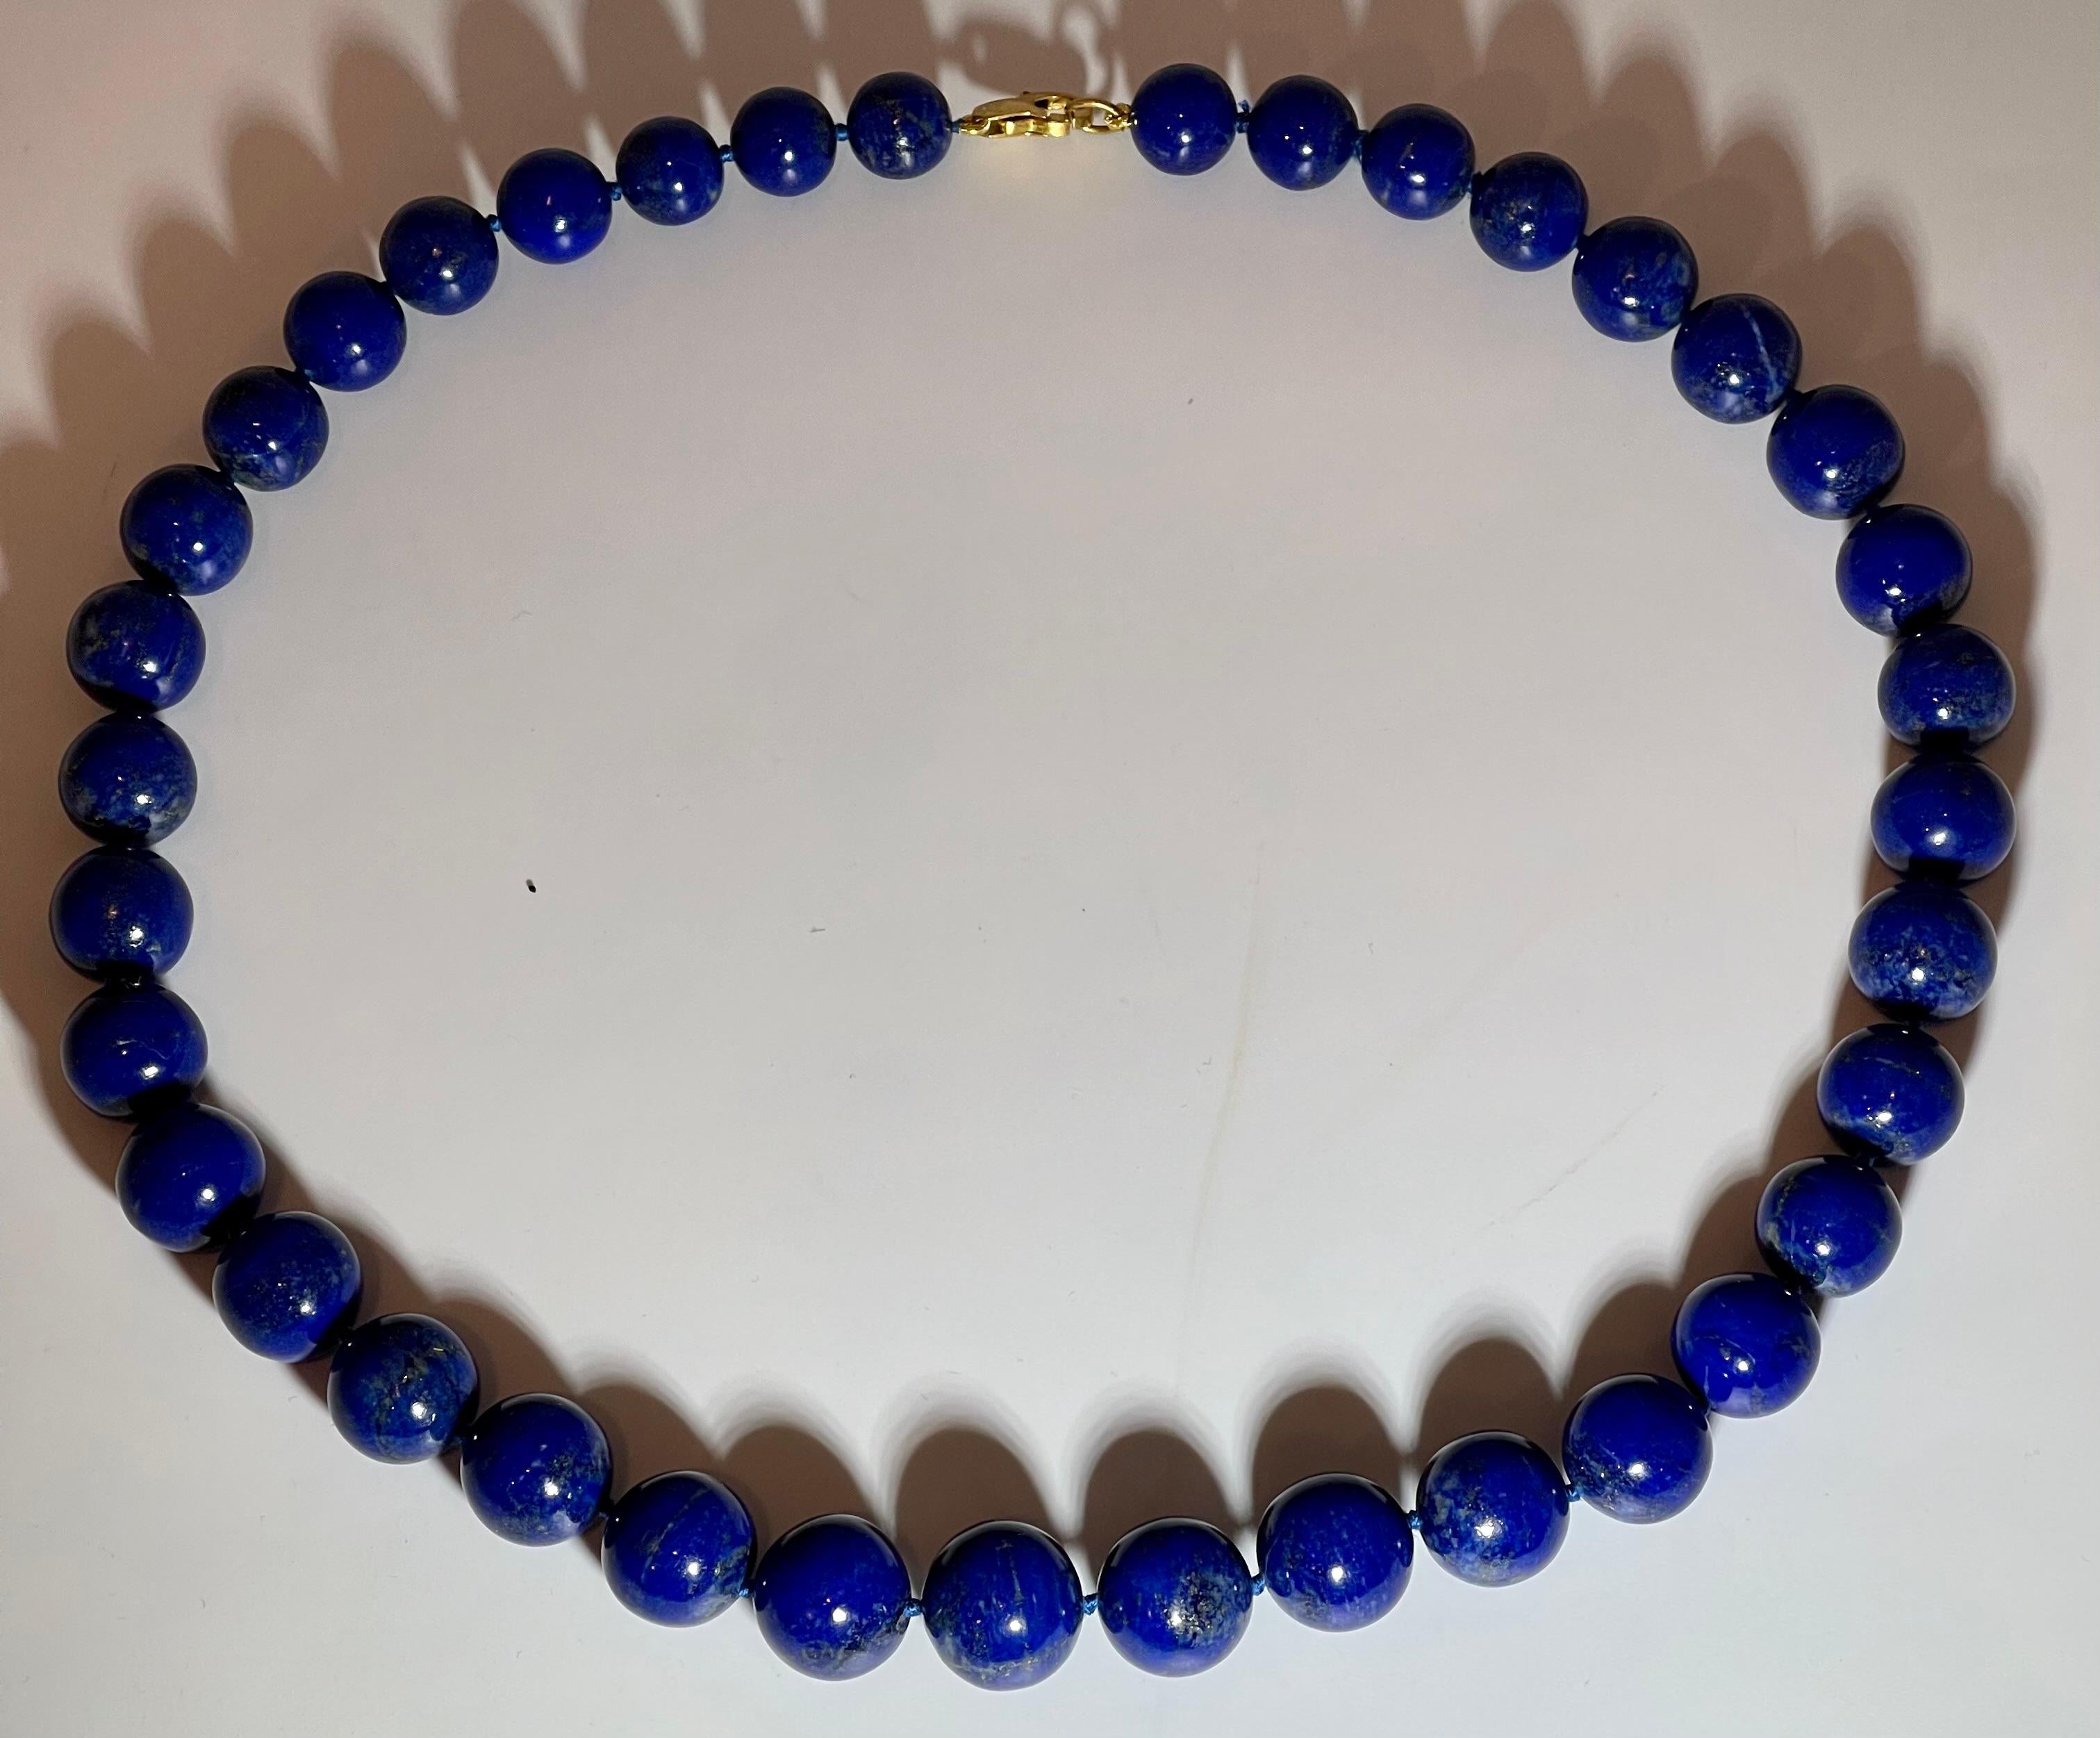 Vintage Lapis Lazuli Single Strand Necklace with 14 Karat Yellow Gold Lobster For Sale 5